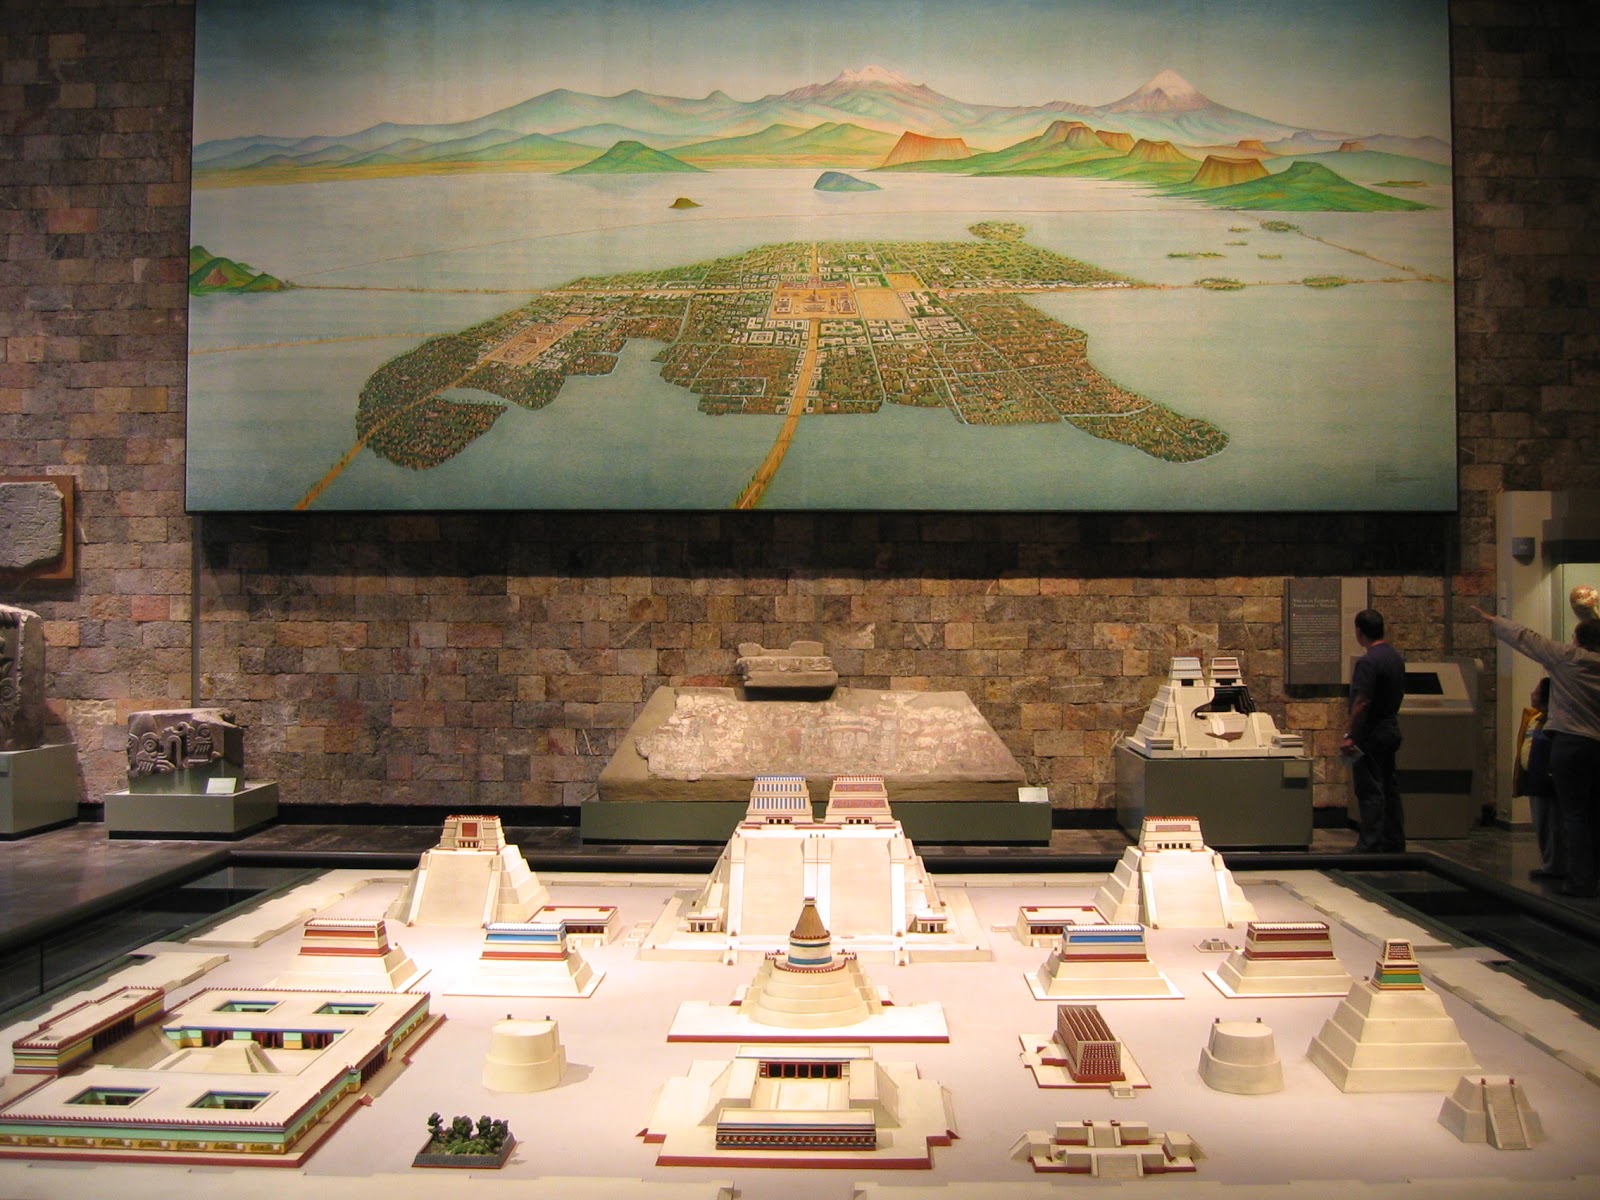 BCR - Year 8 History: Images of Tenochtitlan